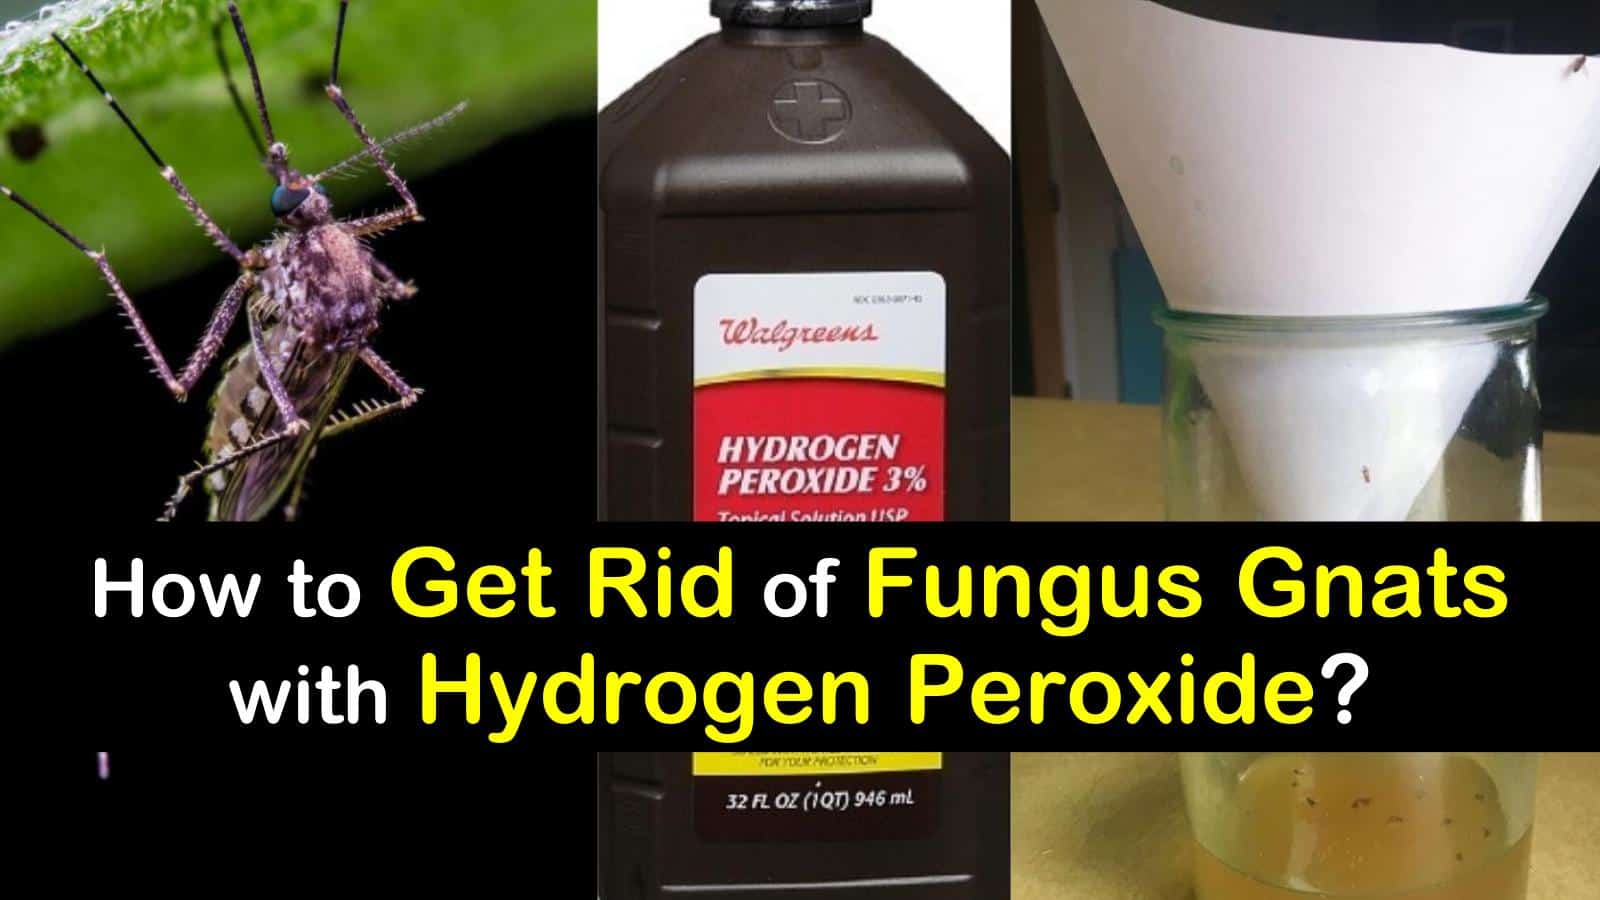 How Can I Get Rid of Fungus Gnats with Hydrogen Peroxide?